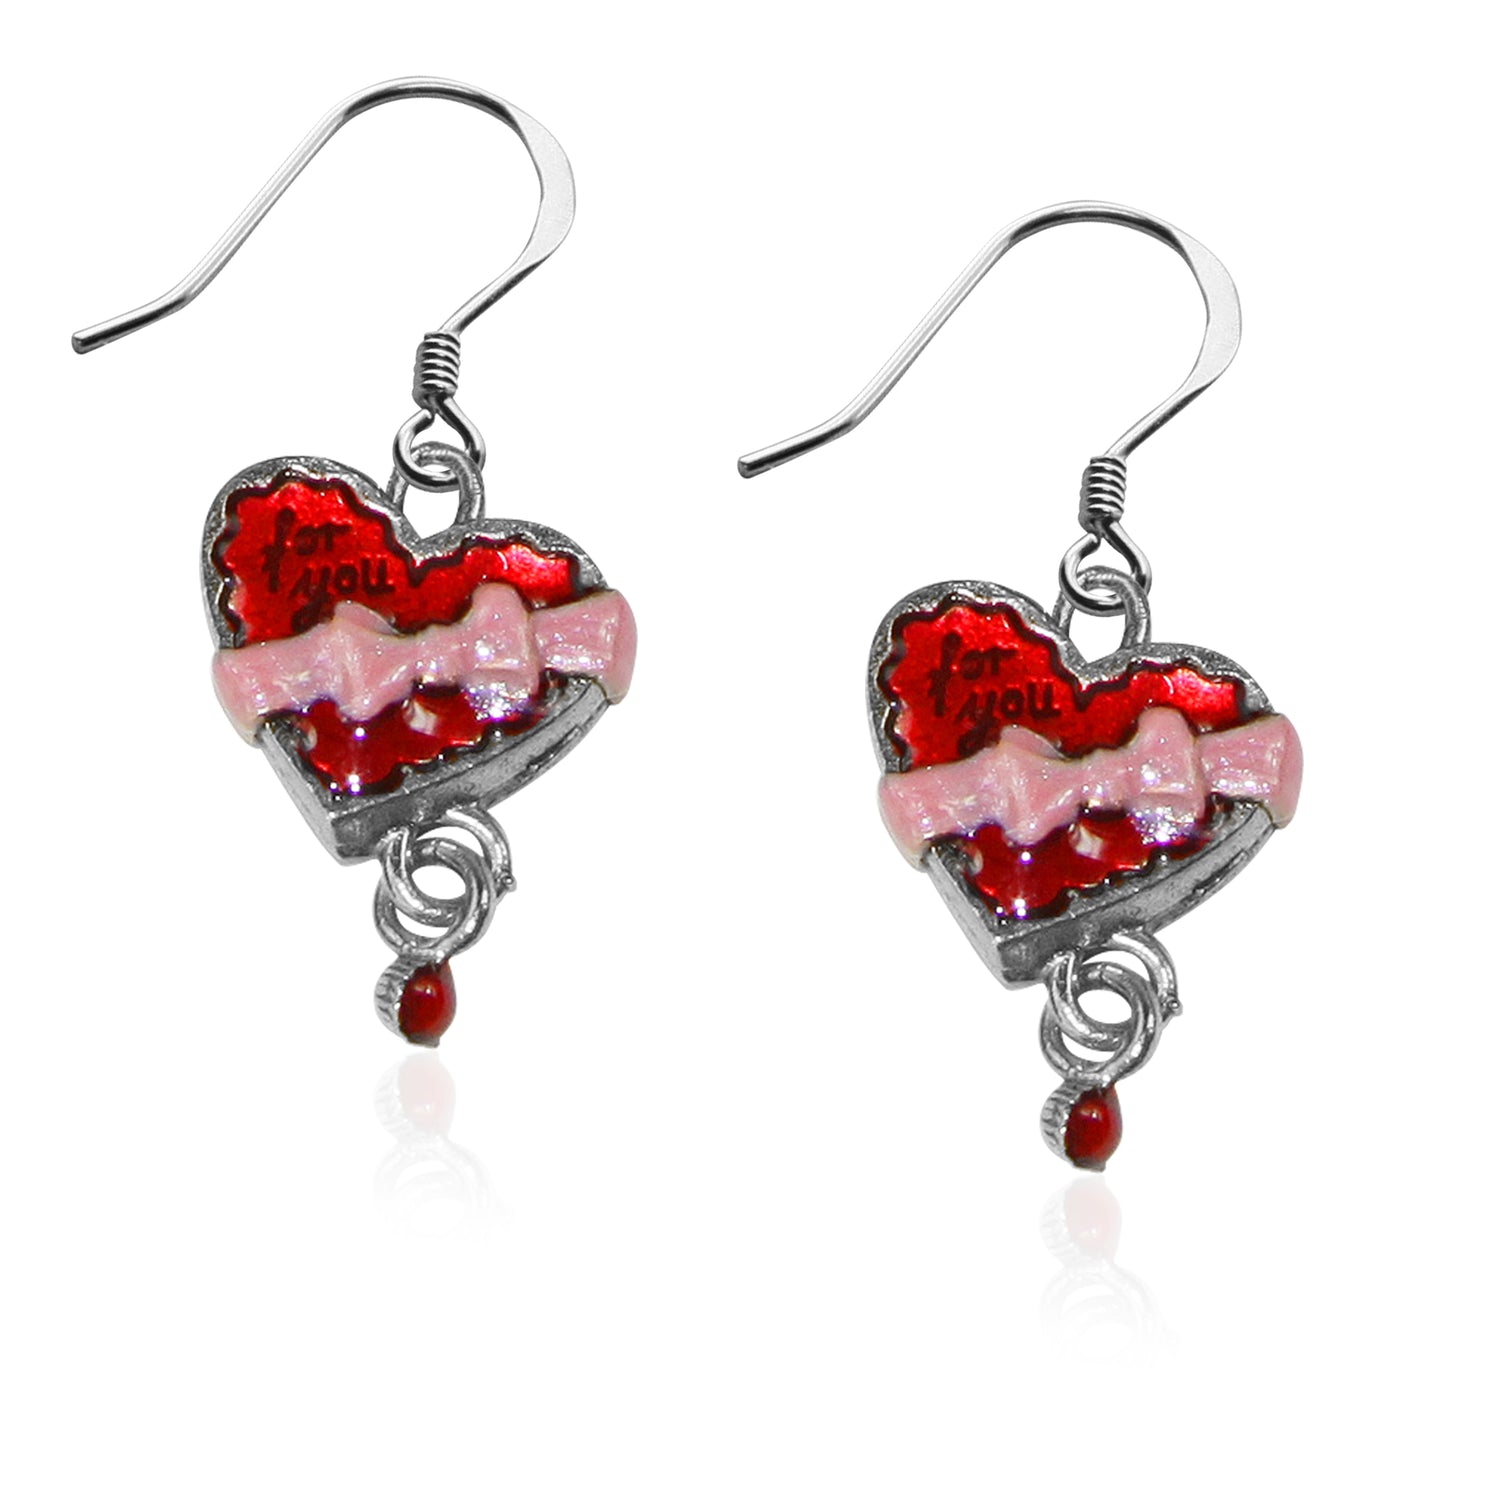 Whimsical Gifts | Heart Chocolate Box Charm Earrings in Silver Finish | Holiday & Seasonal Themed | Valentine&